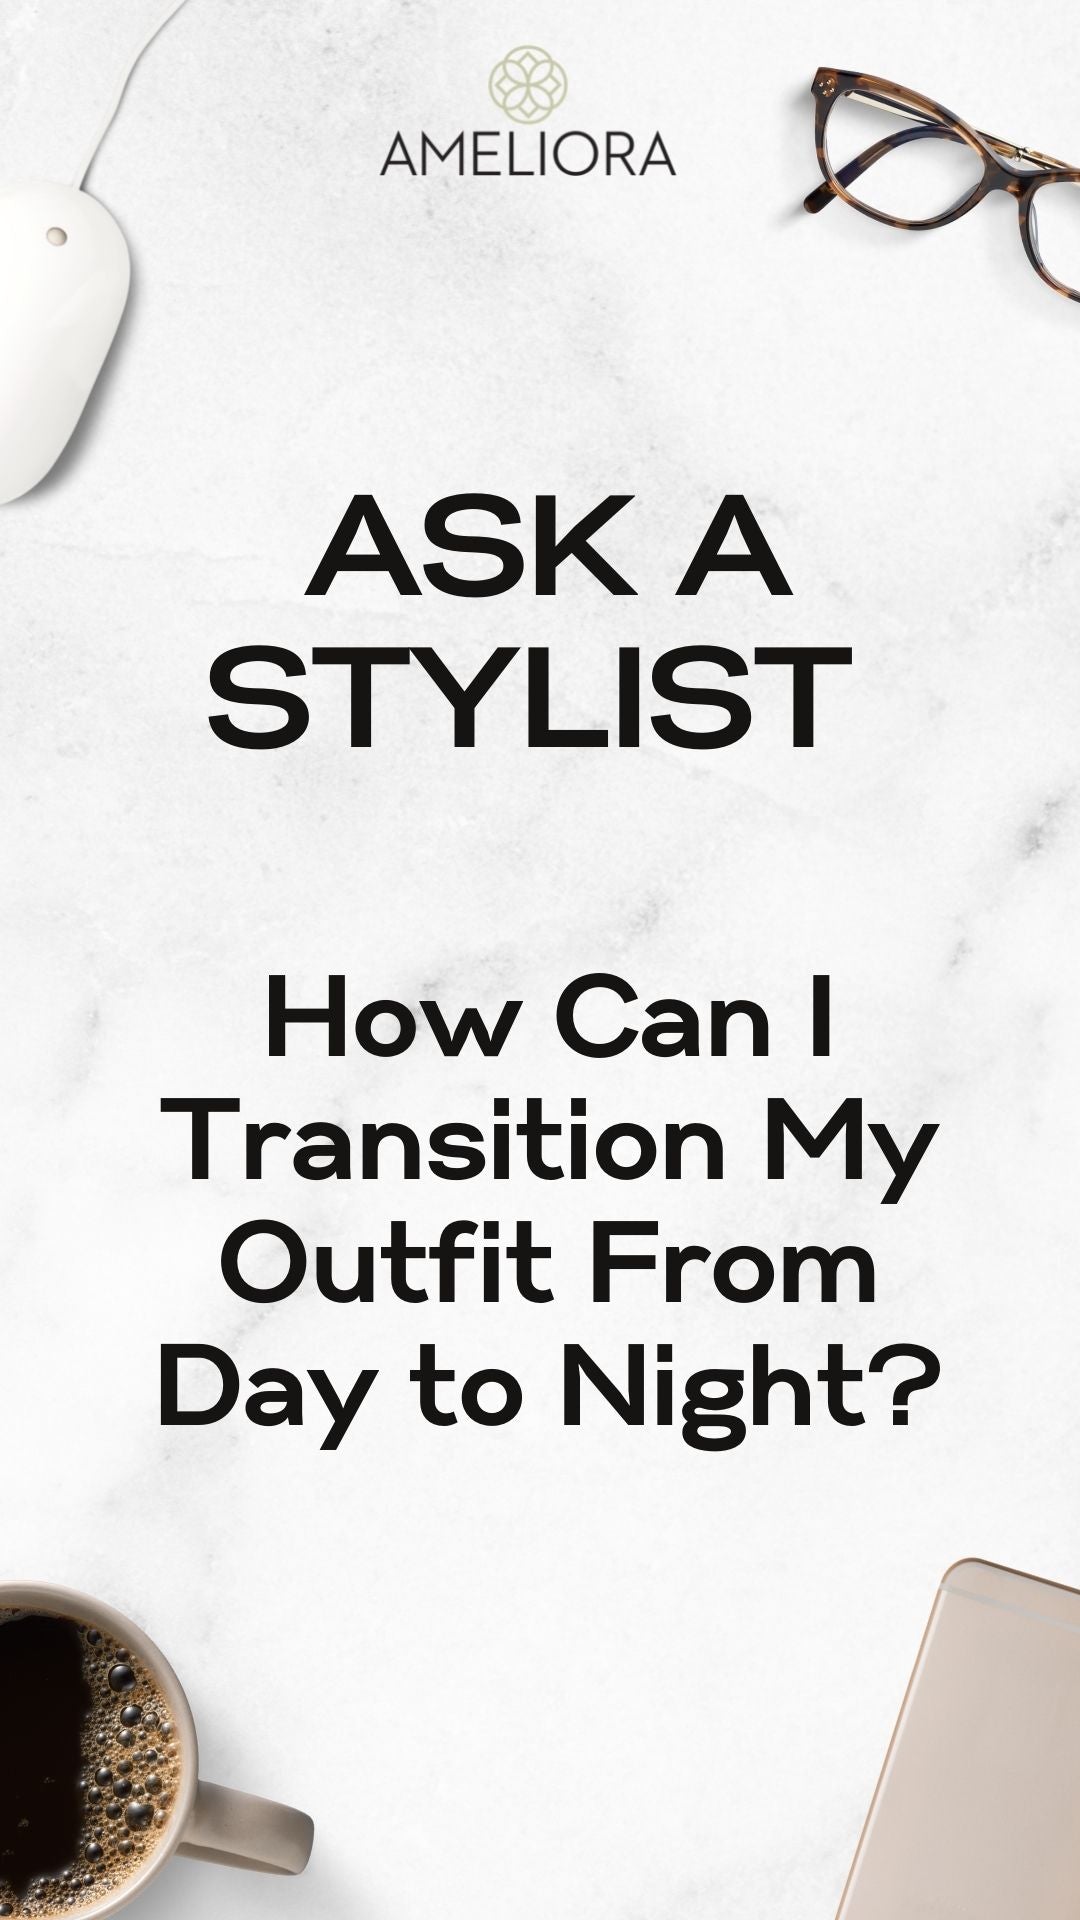 How can I transition my outfit from day to night?